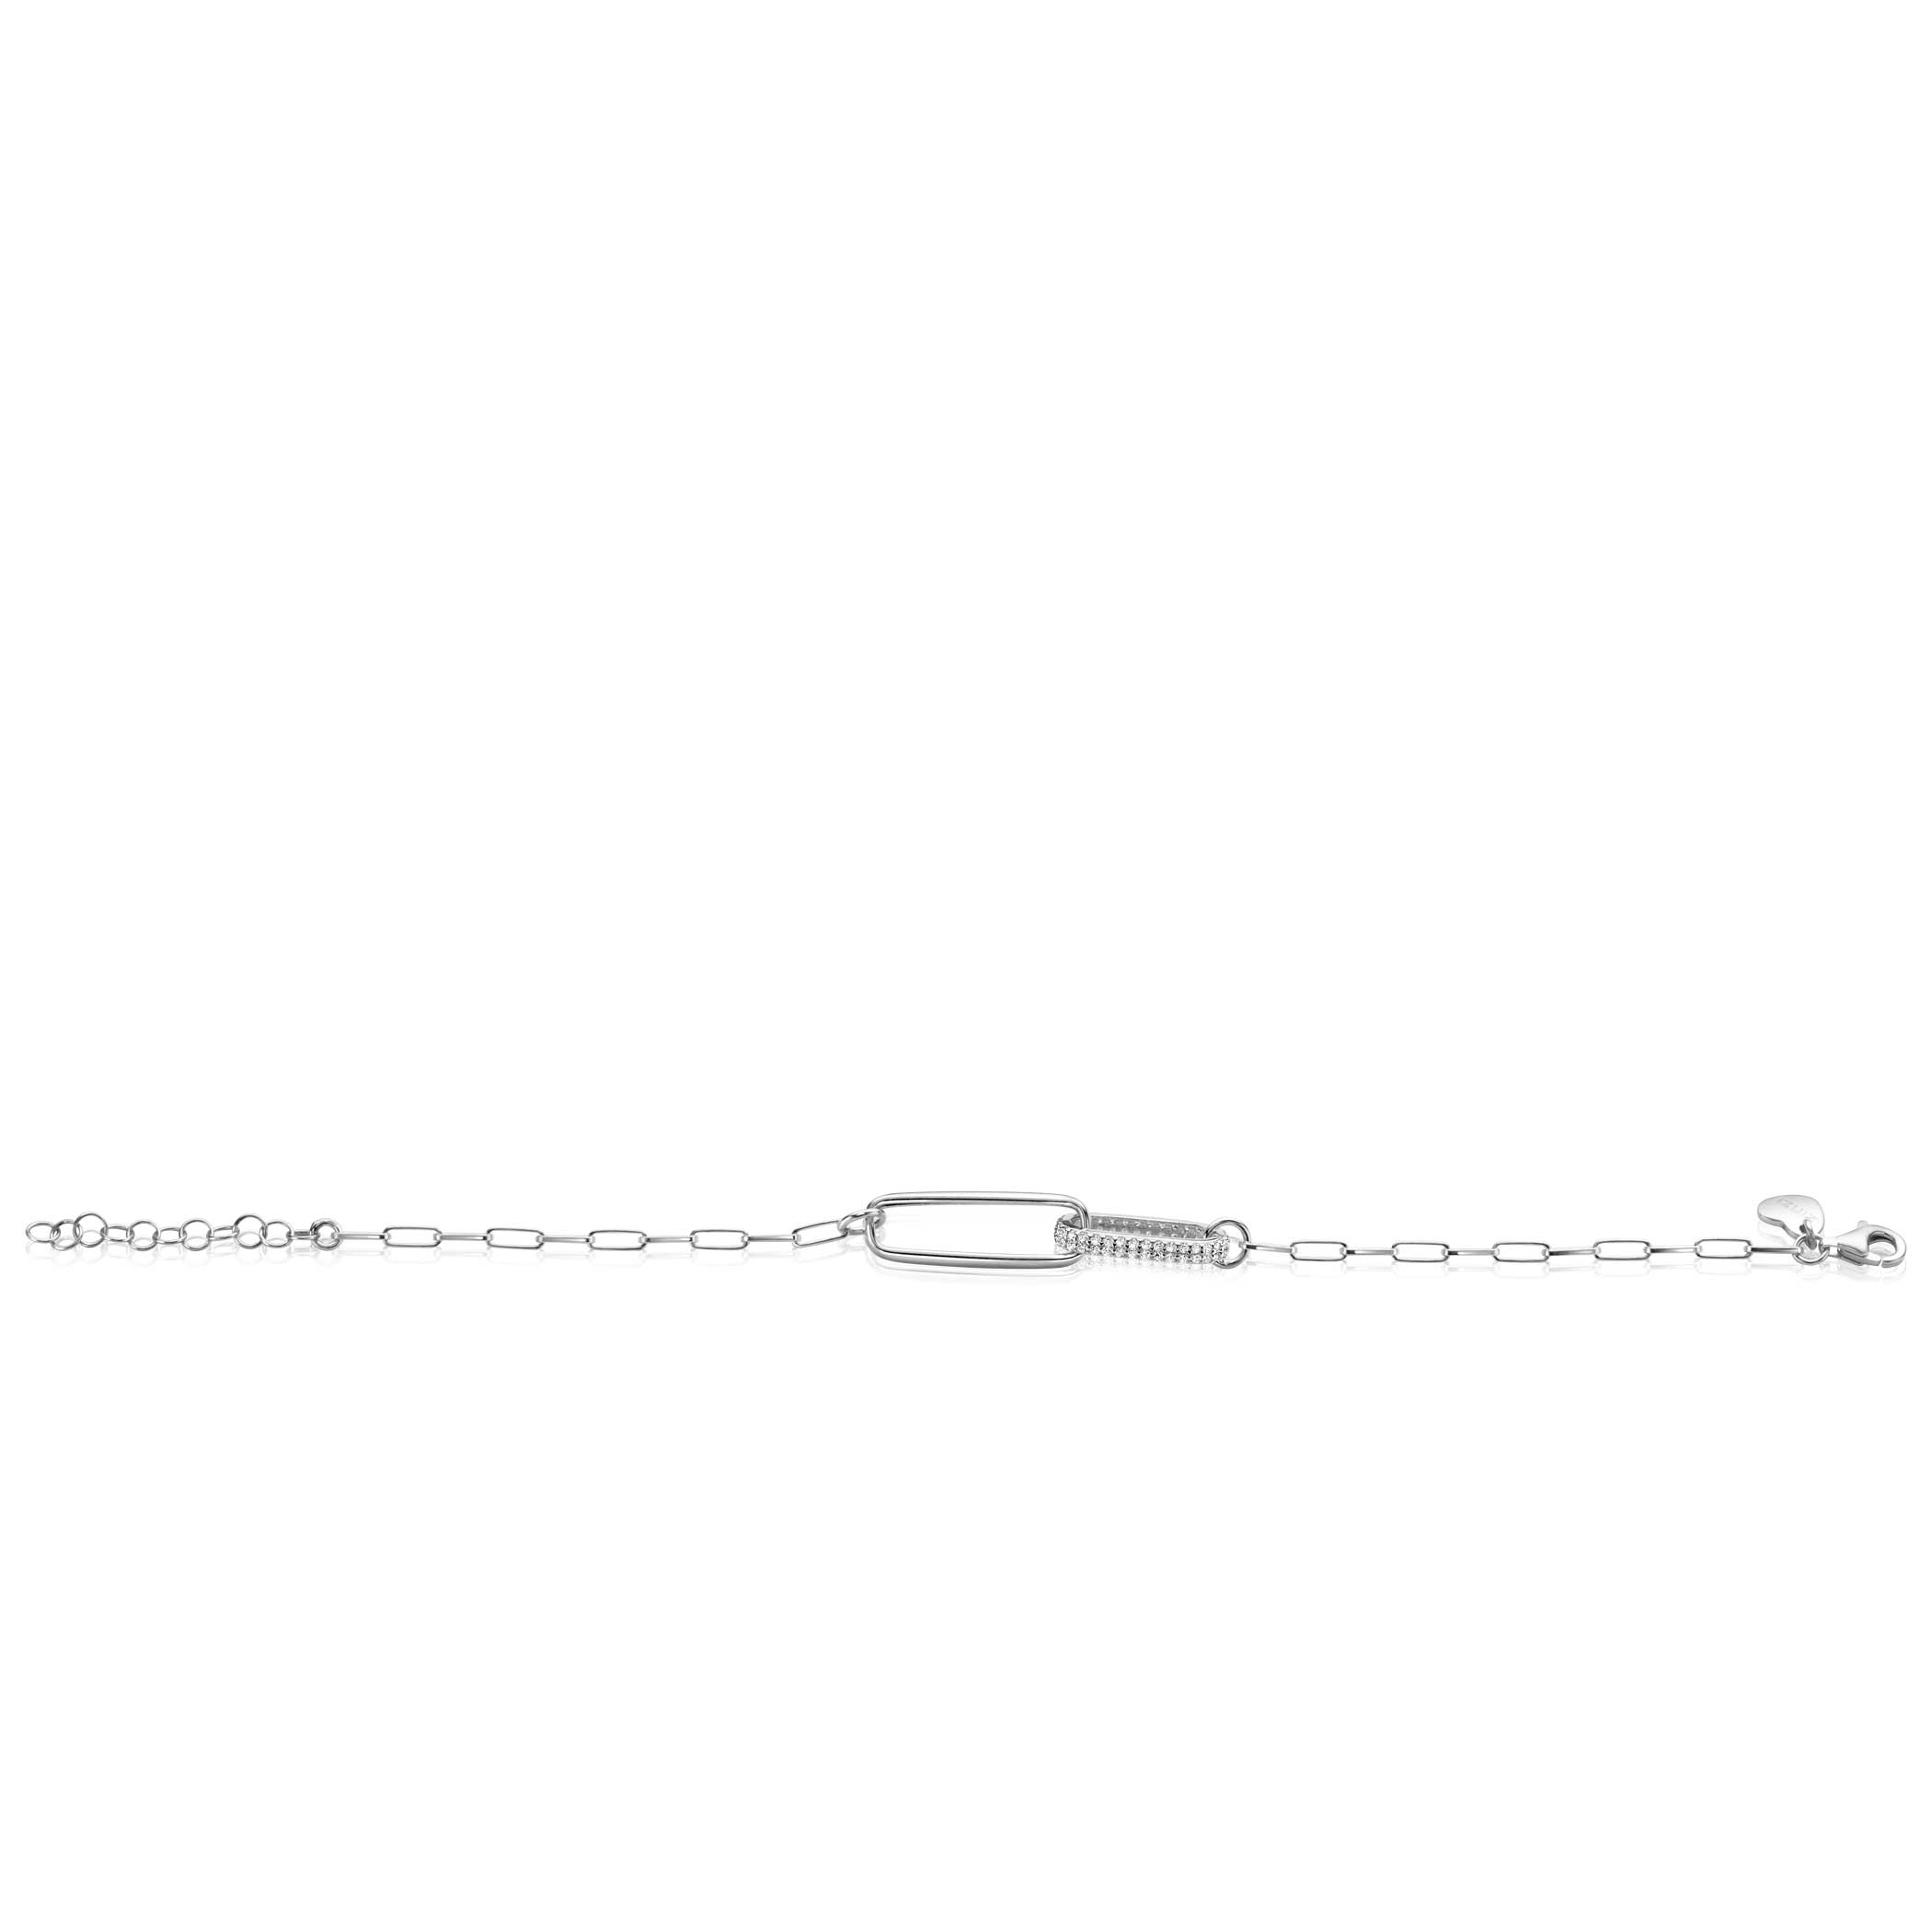 ZINZI Sterling Silver Chain Bracelet with 2 Large Oval Chains Set with White Zirconia ZIA2371